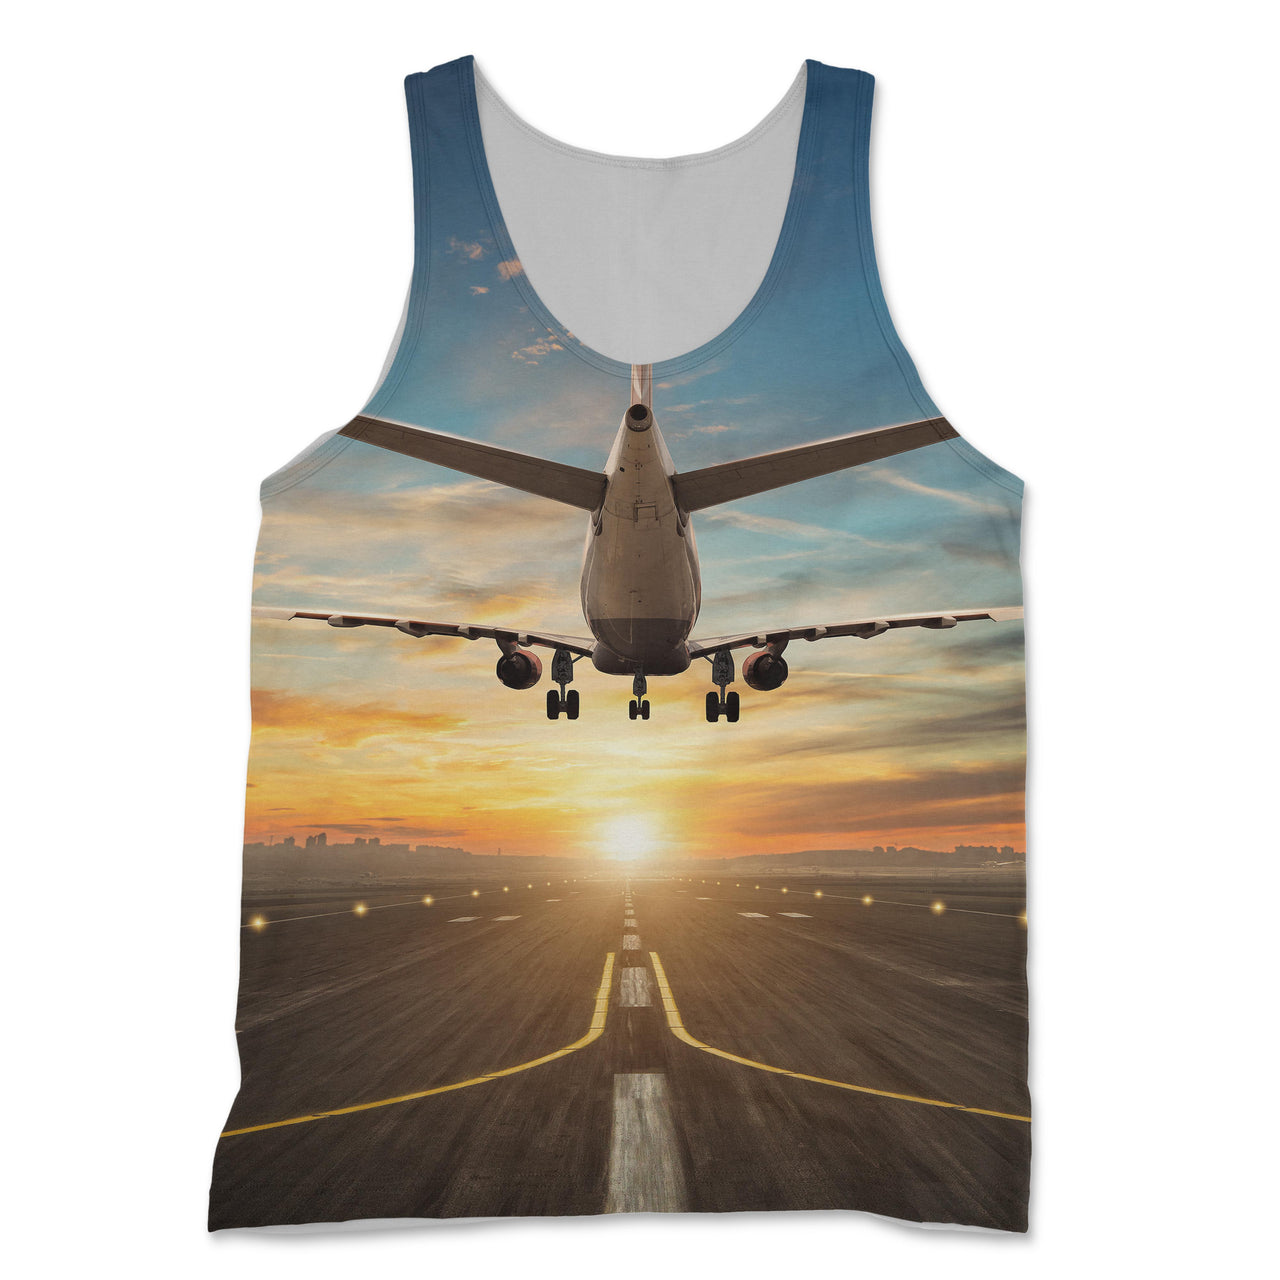 Airplane over Runway Towards the Sunrise Designed 3D Tank Tops